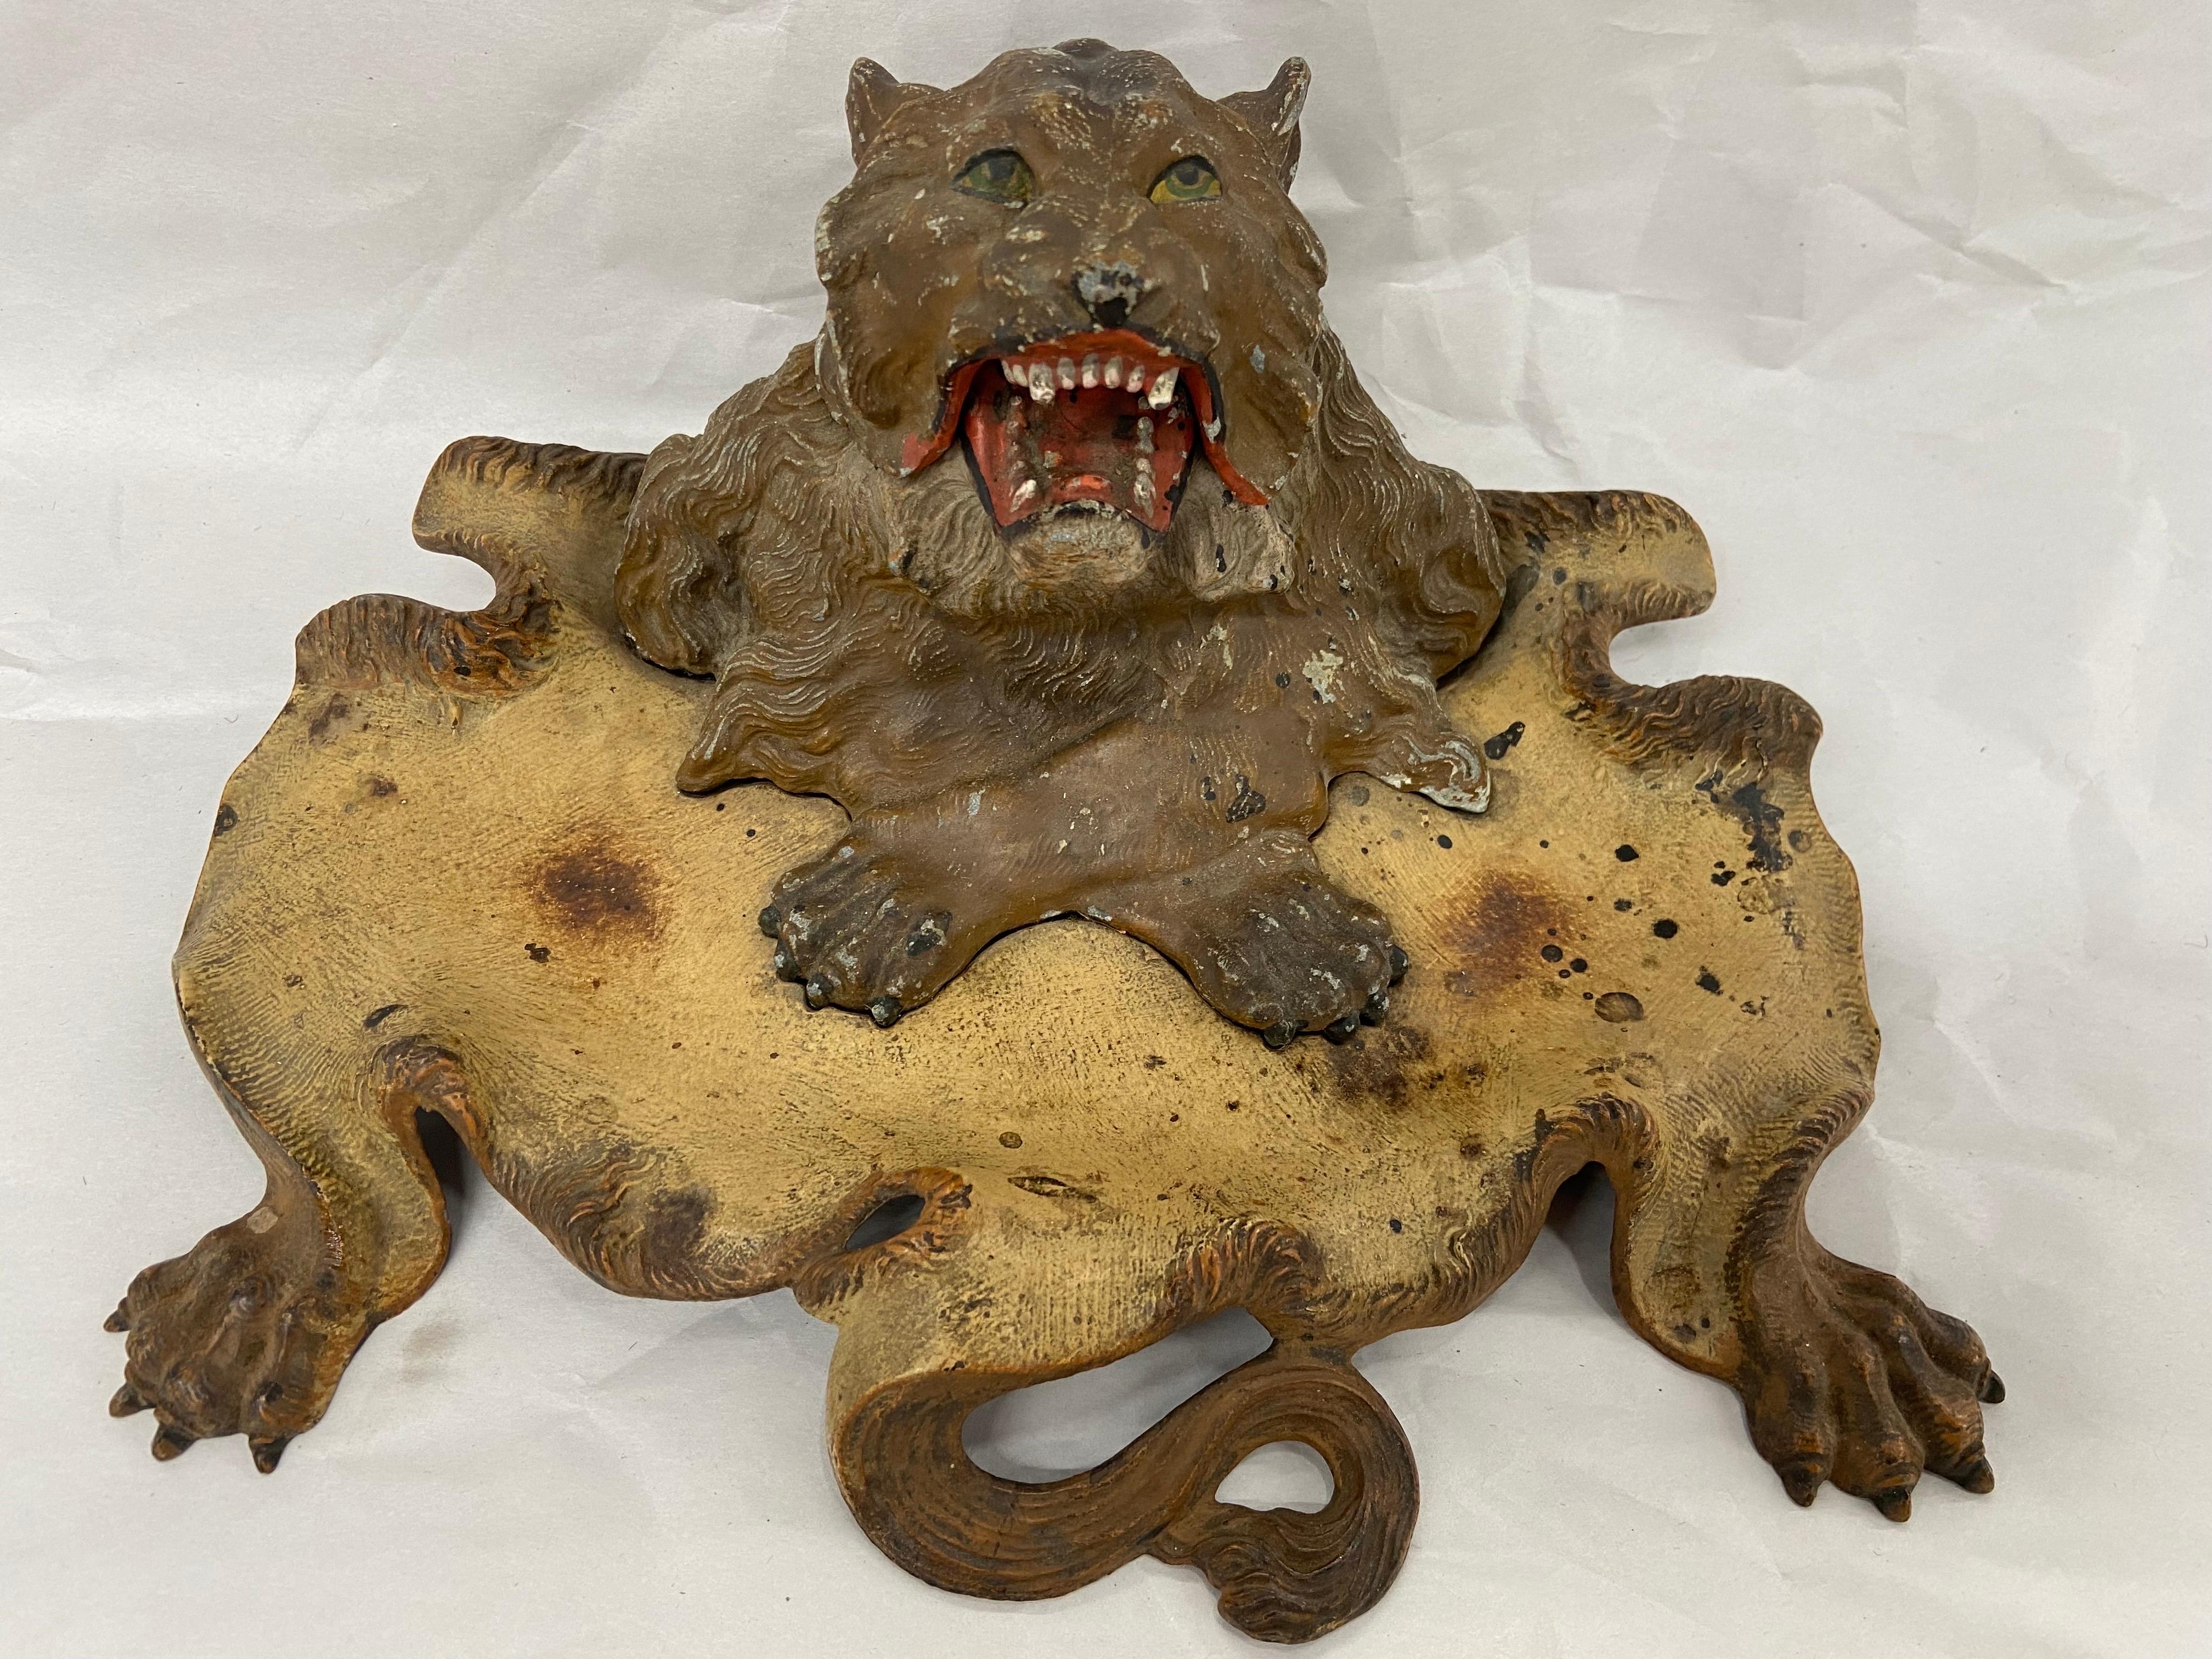 A Victorian Era, circa 1900, antique cold painted spelter (smelted and alloyed zinc) figural inkwell depicting a roaring lion with front paws crossed and a lion skin rug that serves as a pen rest or even a vide poche. The base / lion skin rug